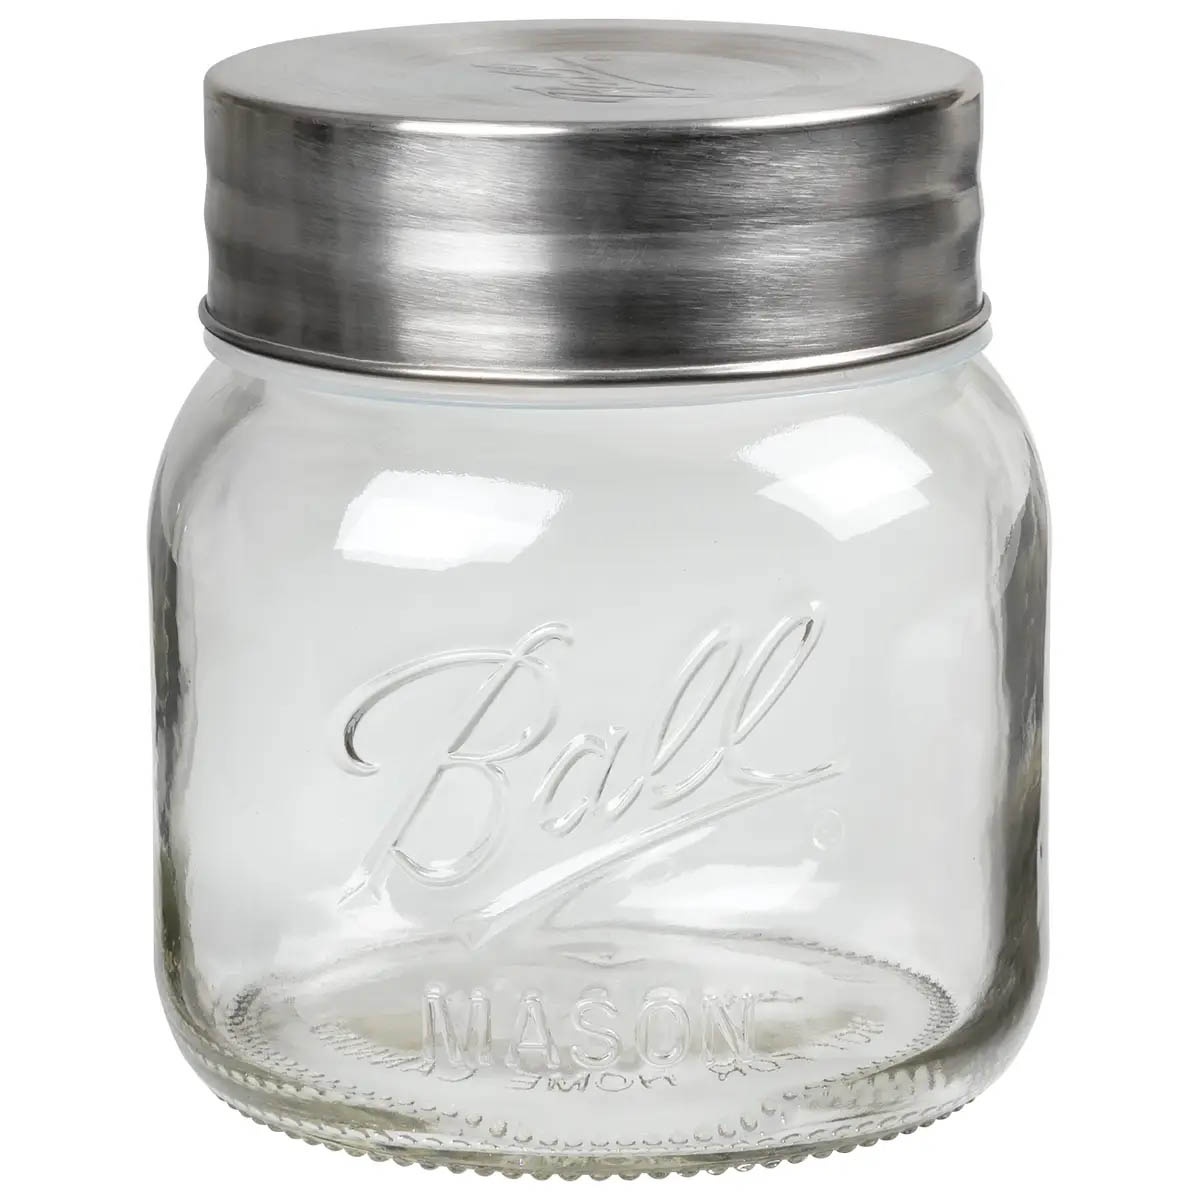 Ball Wide Mouth 64 oz half gallon mason Jars with Lids and Bands 6